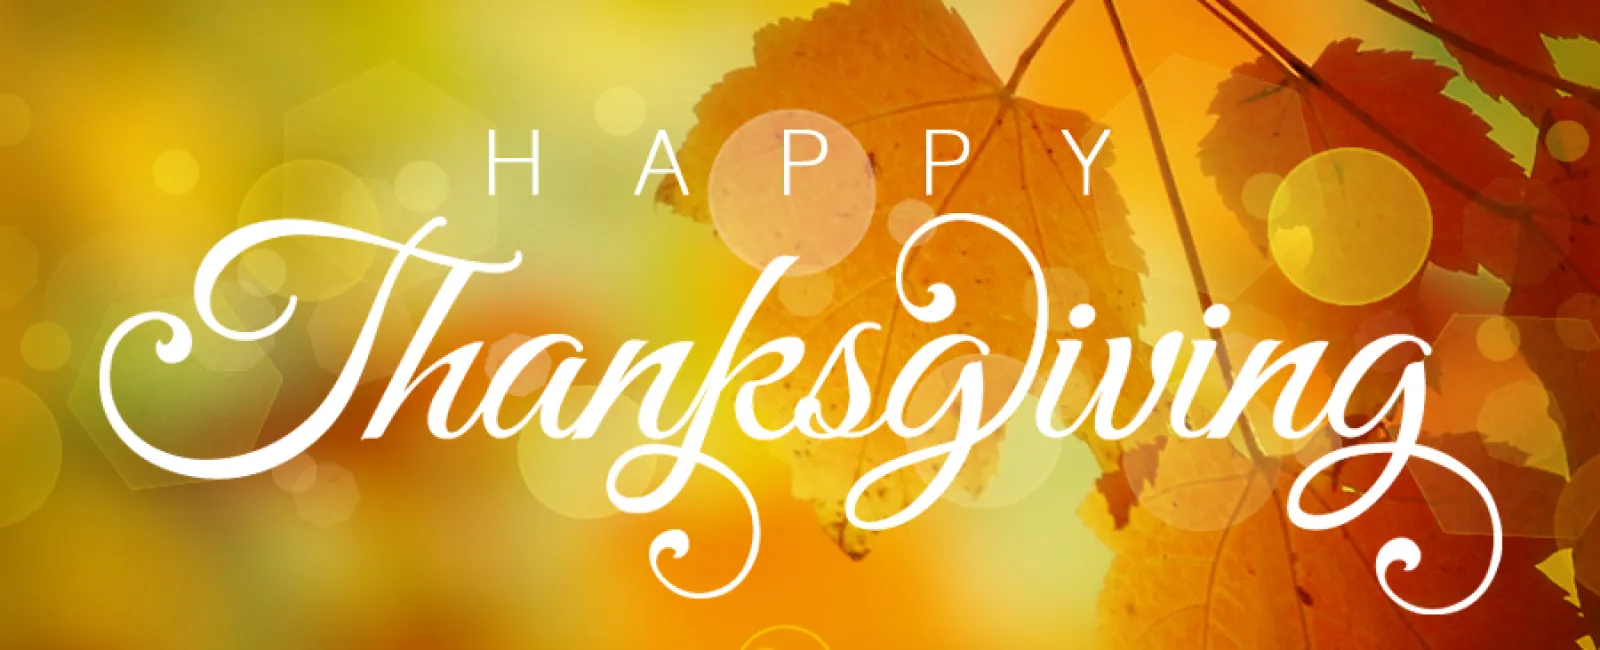 3 Tips, Tools and Topics to be Thankful for